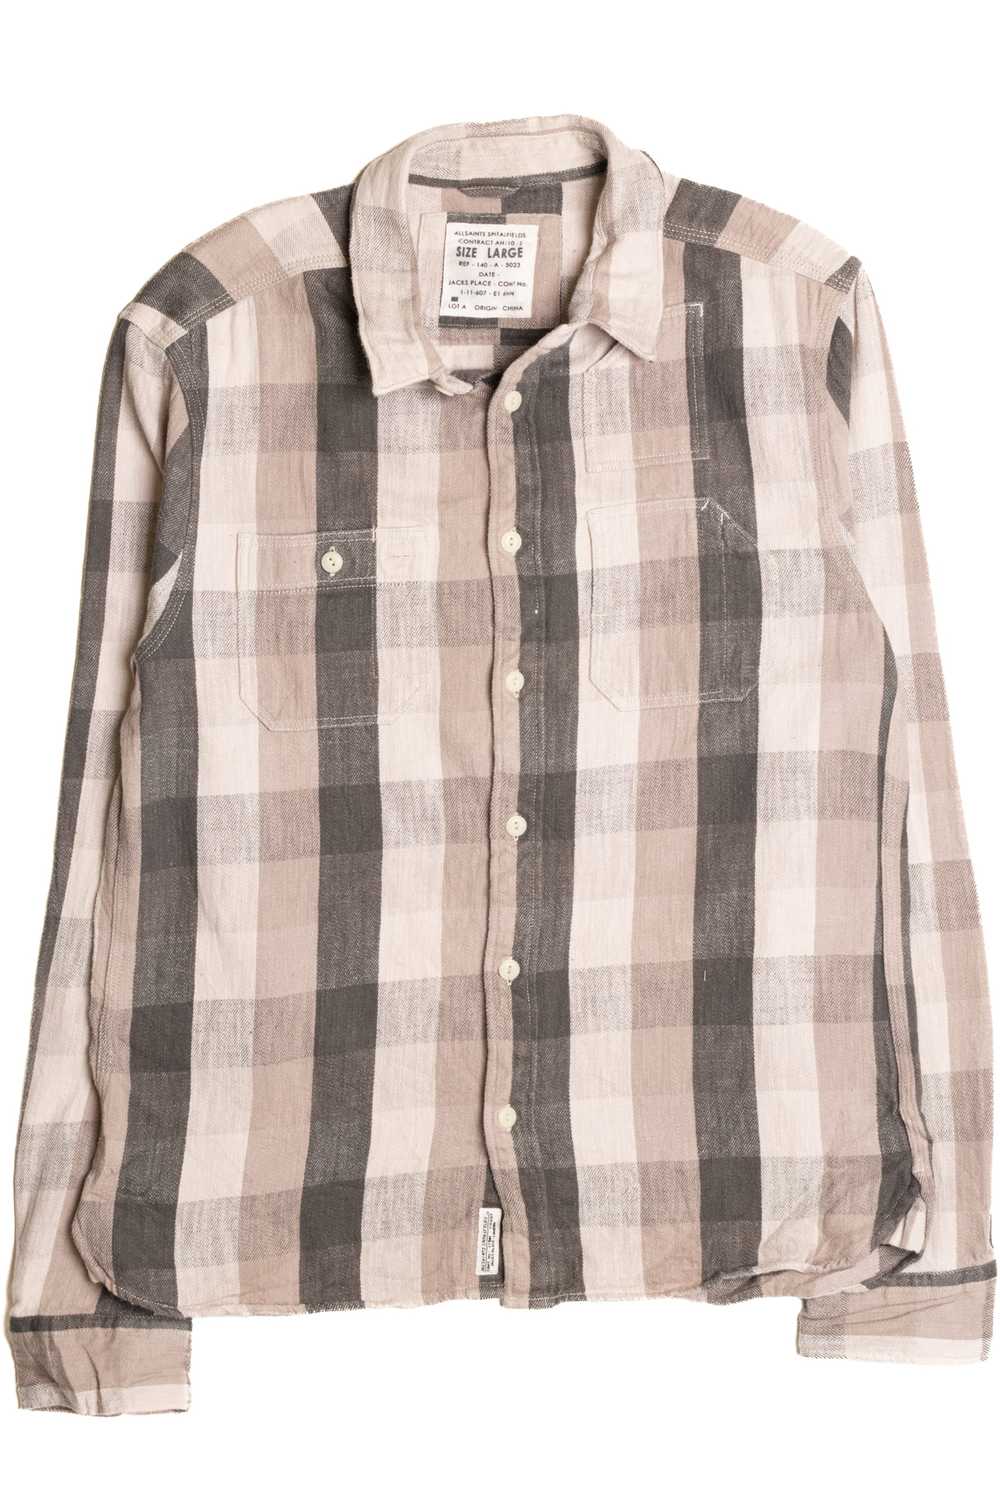 Striped Flannel Shirt 5064 - image 1